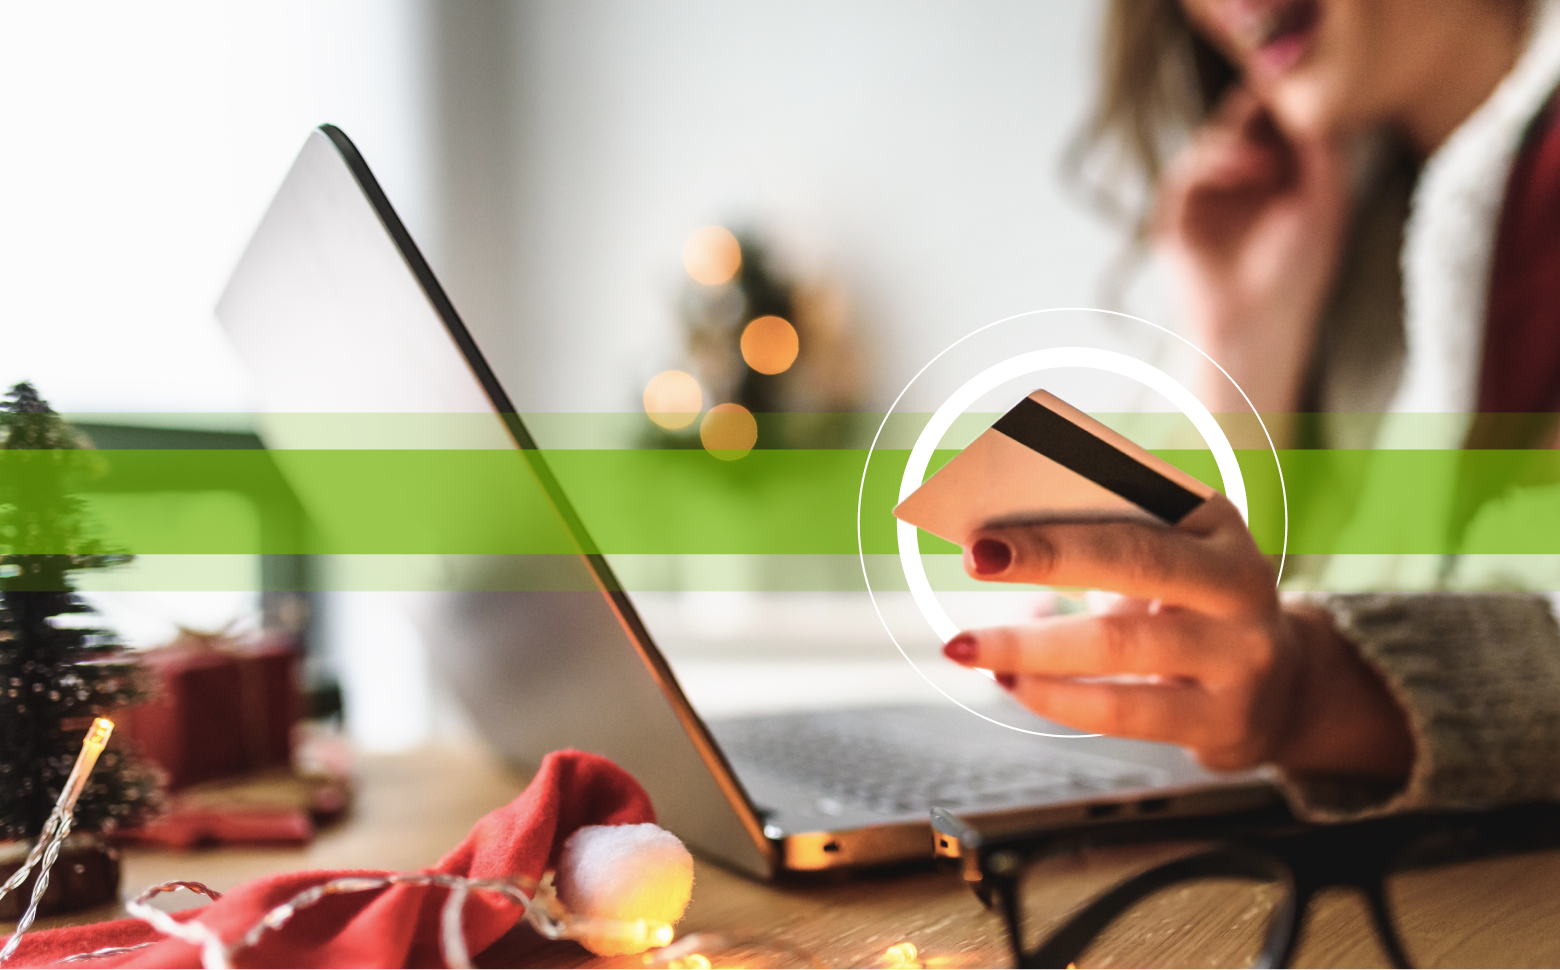 7 Tips for Staying Safe Online This Holiday Season